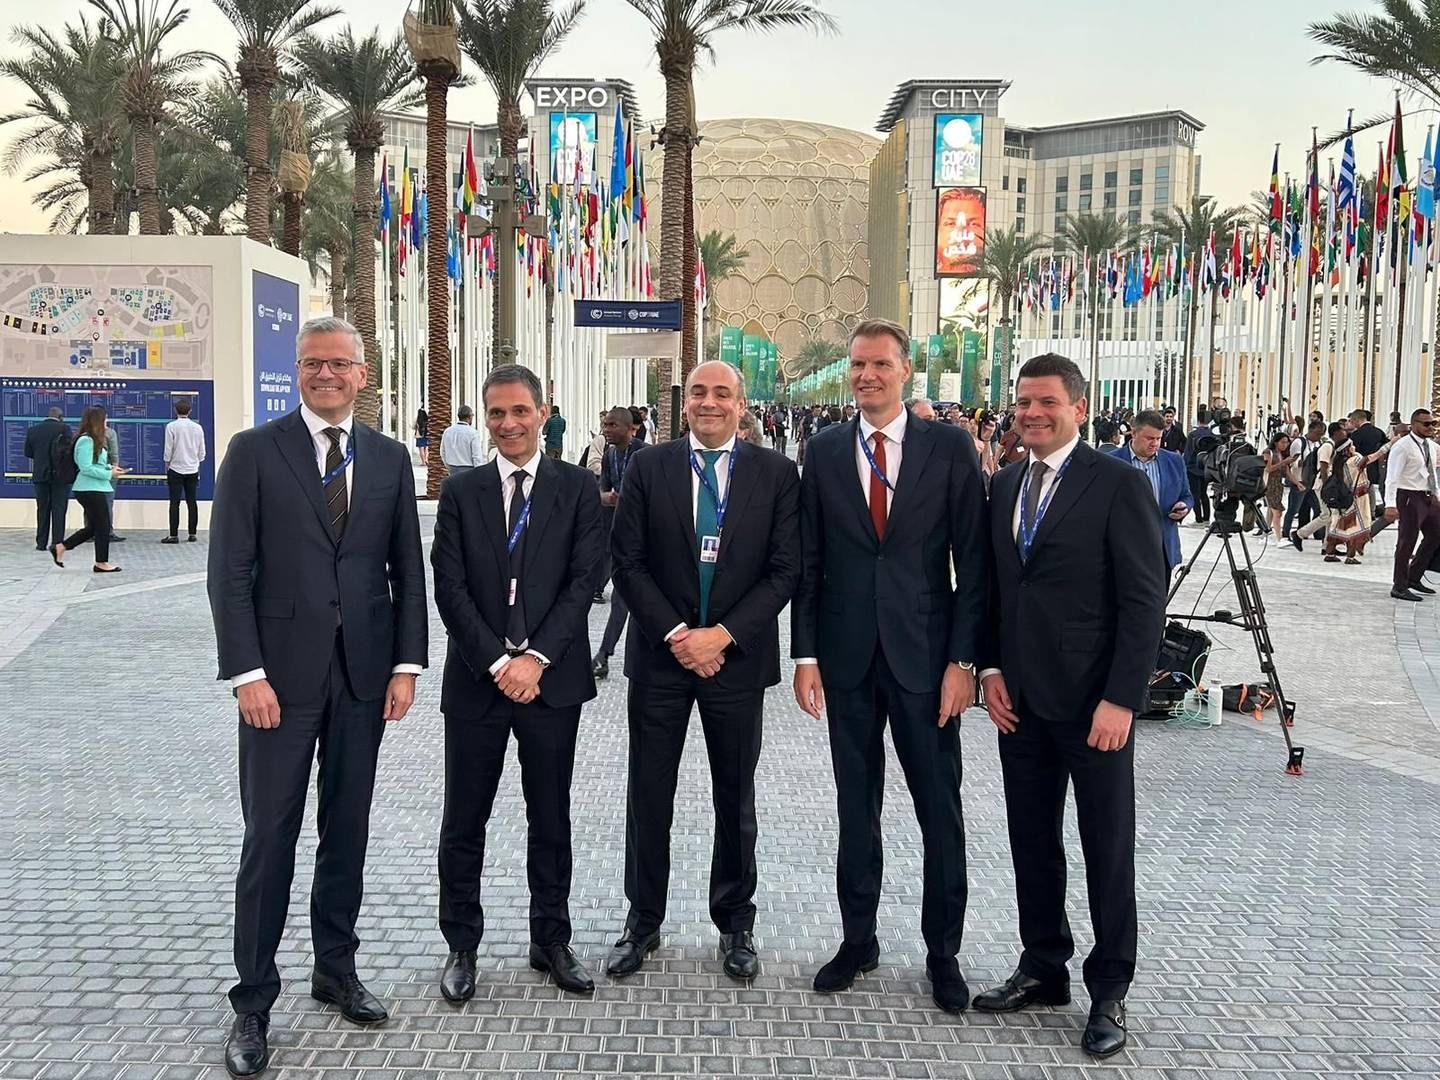 Expectations for this year's COP 28 meeting were high as plans to fulfill the Paris Agreement were laid out. Pictured here are chief executives from MSC, Maersk, CMA CGM, Hapag-Lloyd and Wallenius Willhelmsen, who have called for an end date for fossil fuel newbuildings. | Photo: Pr/mærsk.